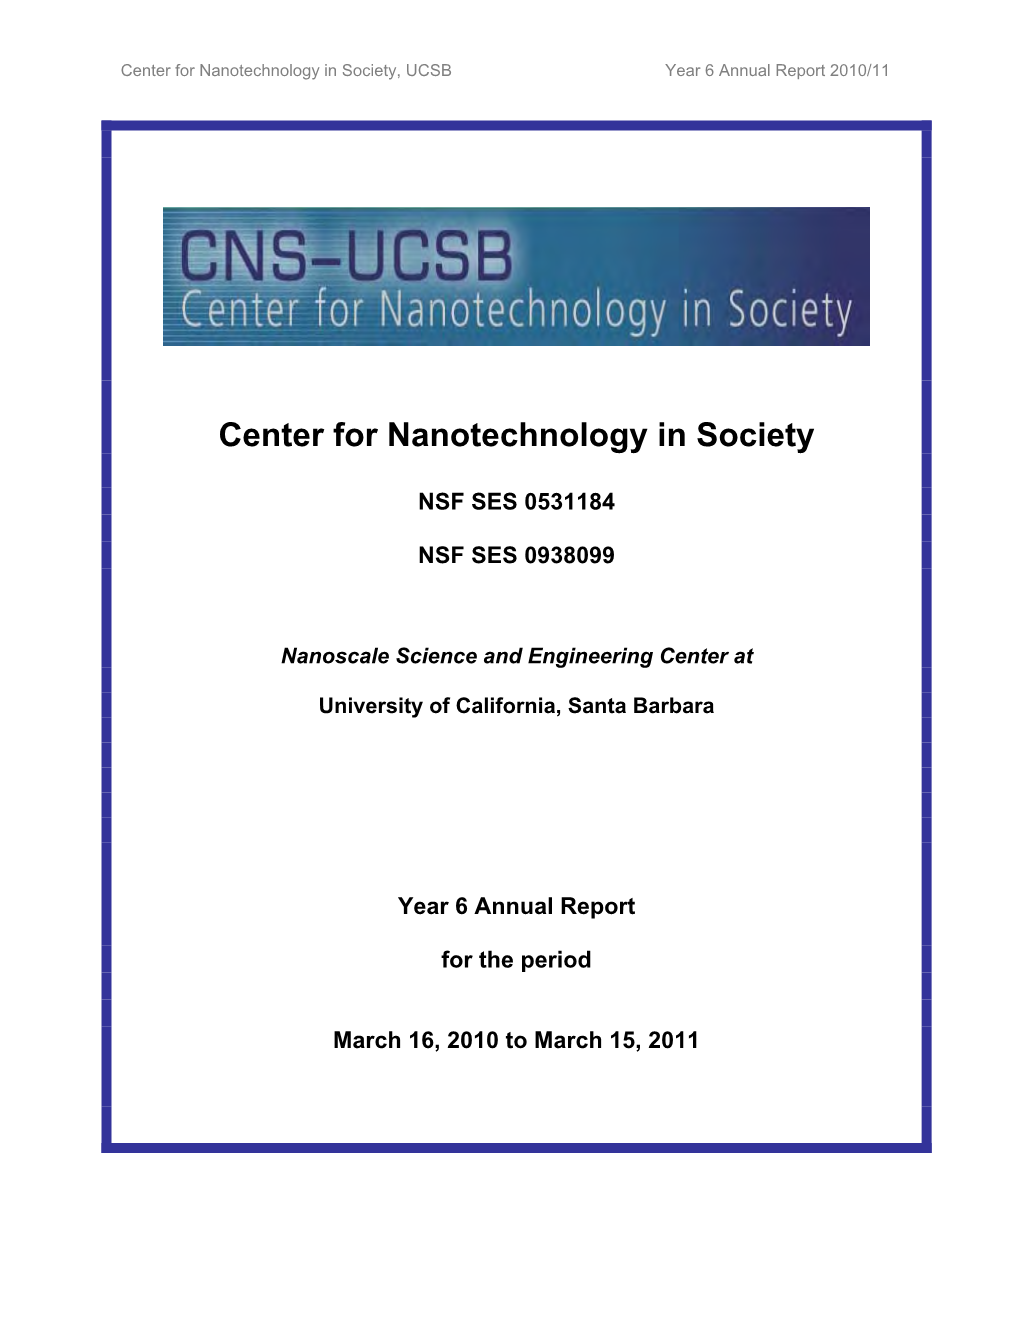 CNS-UCSB 2011 Annual Report